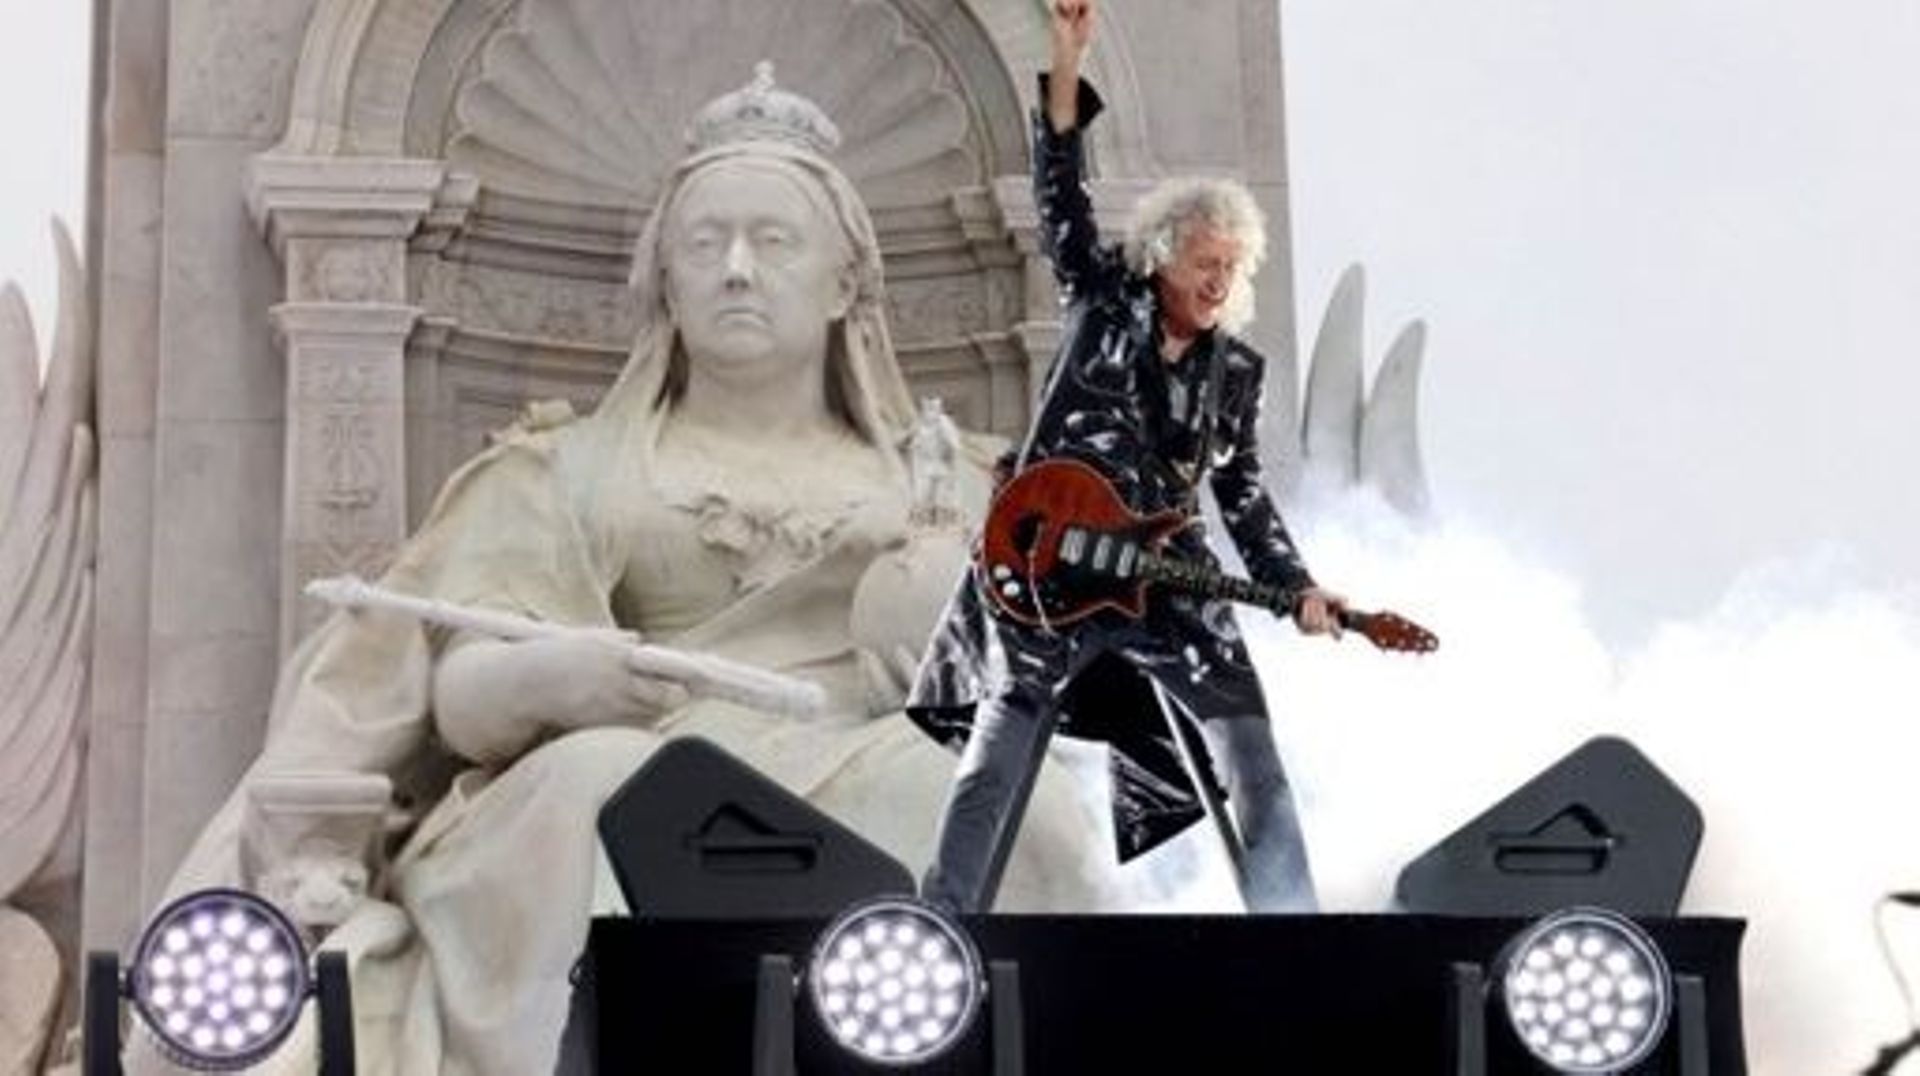 British guitarist Brian May performs at the Platinum Party at Buckingham Palace on June 4, 2022 as part of Queen Elizabeth II's platinum jubilee celebrations. Some 22,000 people and millions more at home are expected at a star-studded musical celebration 